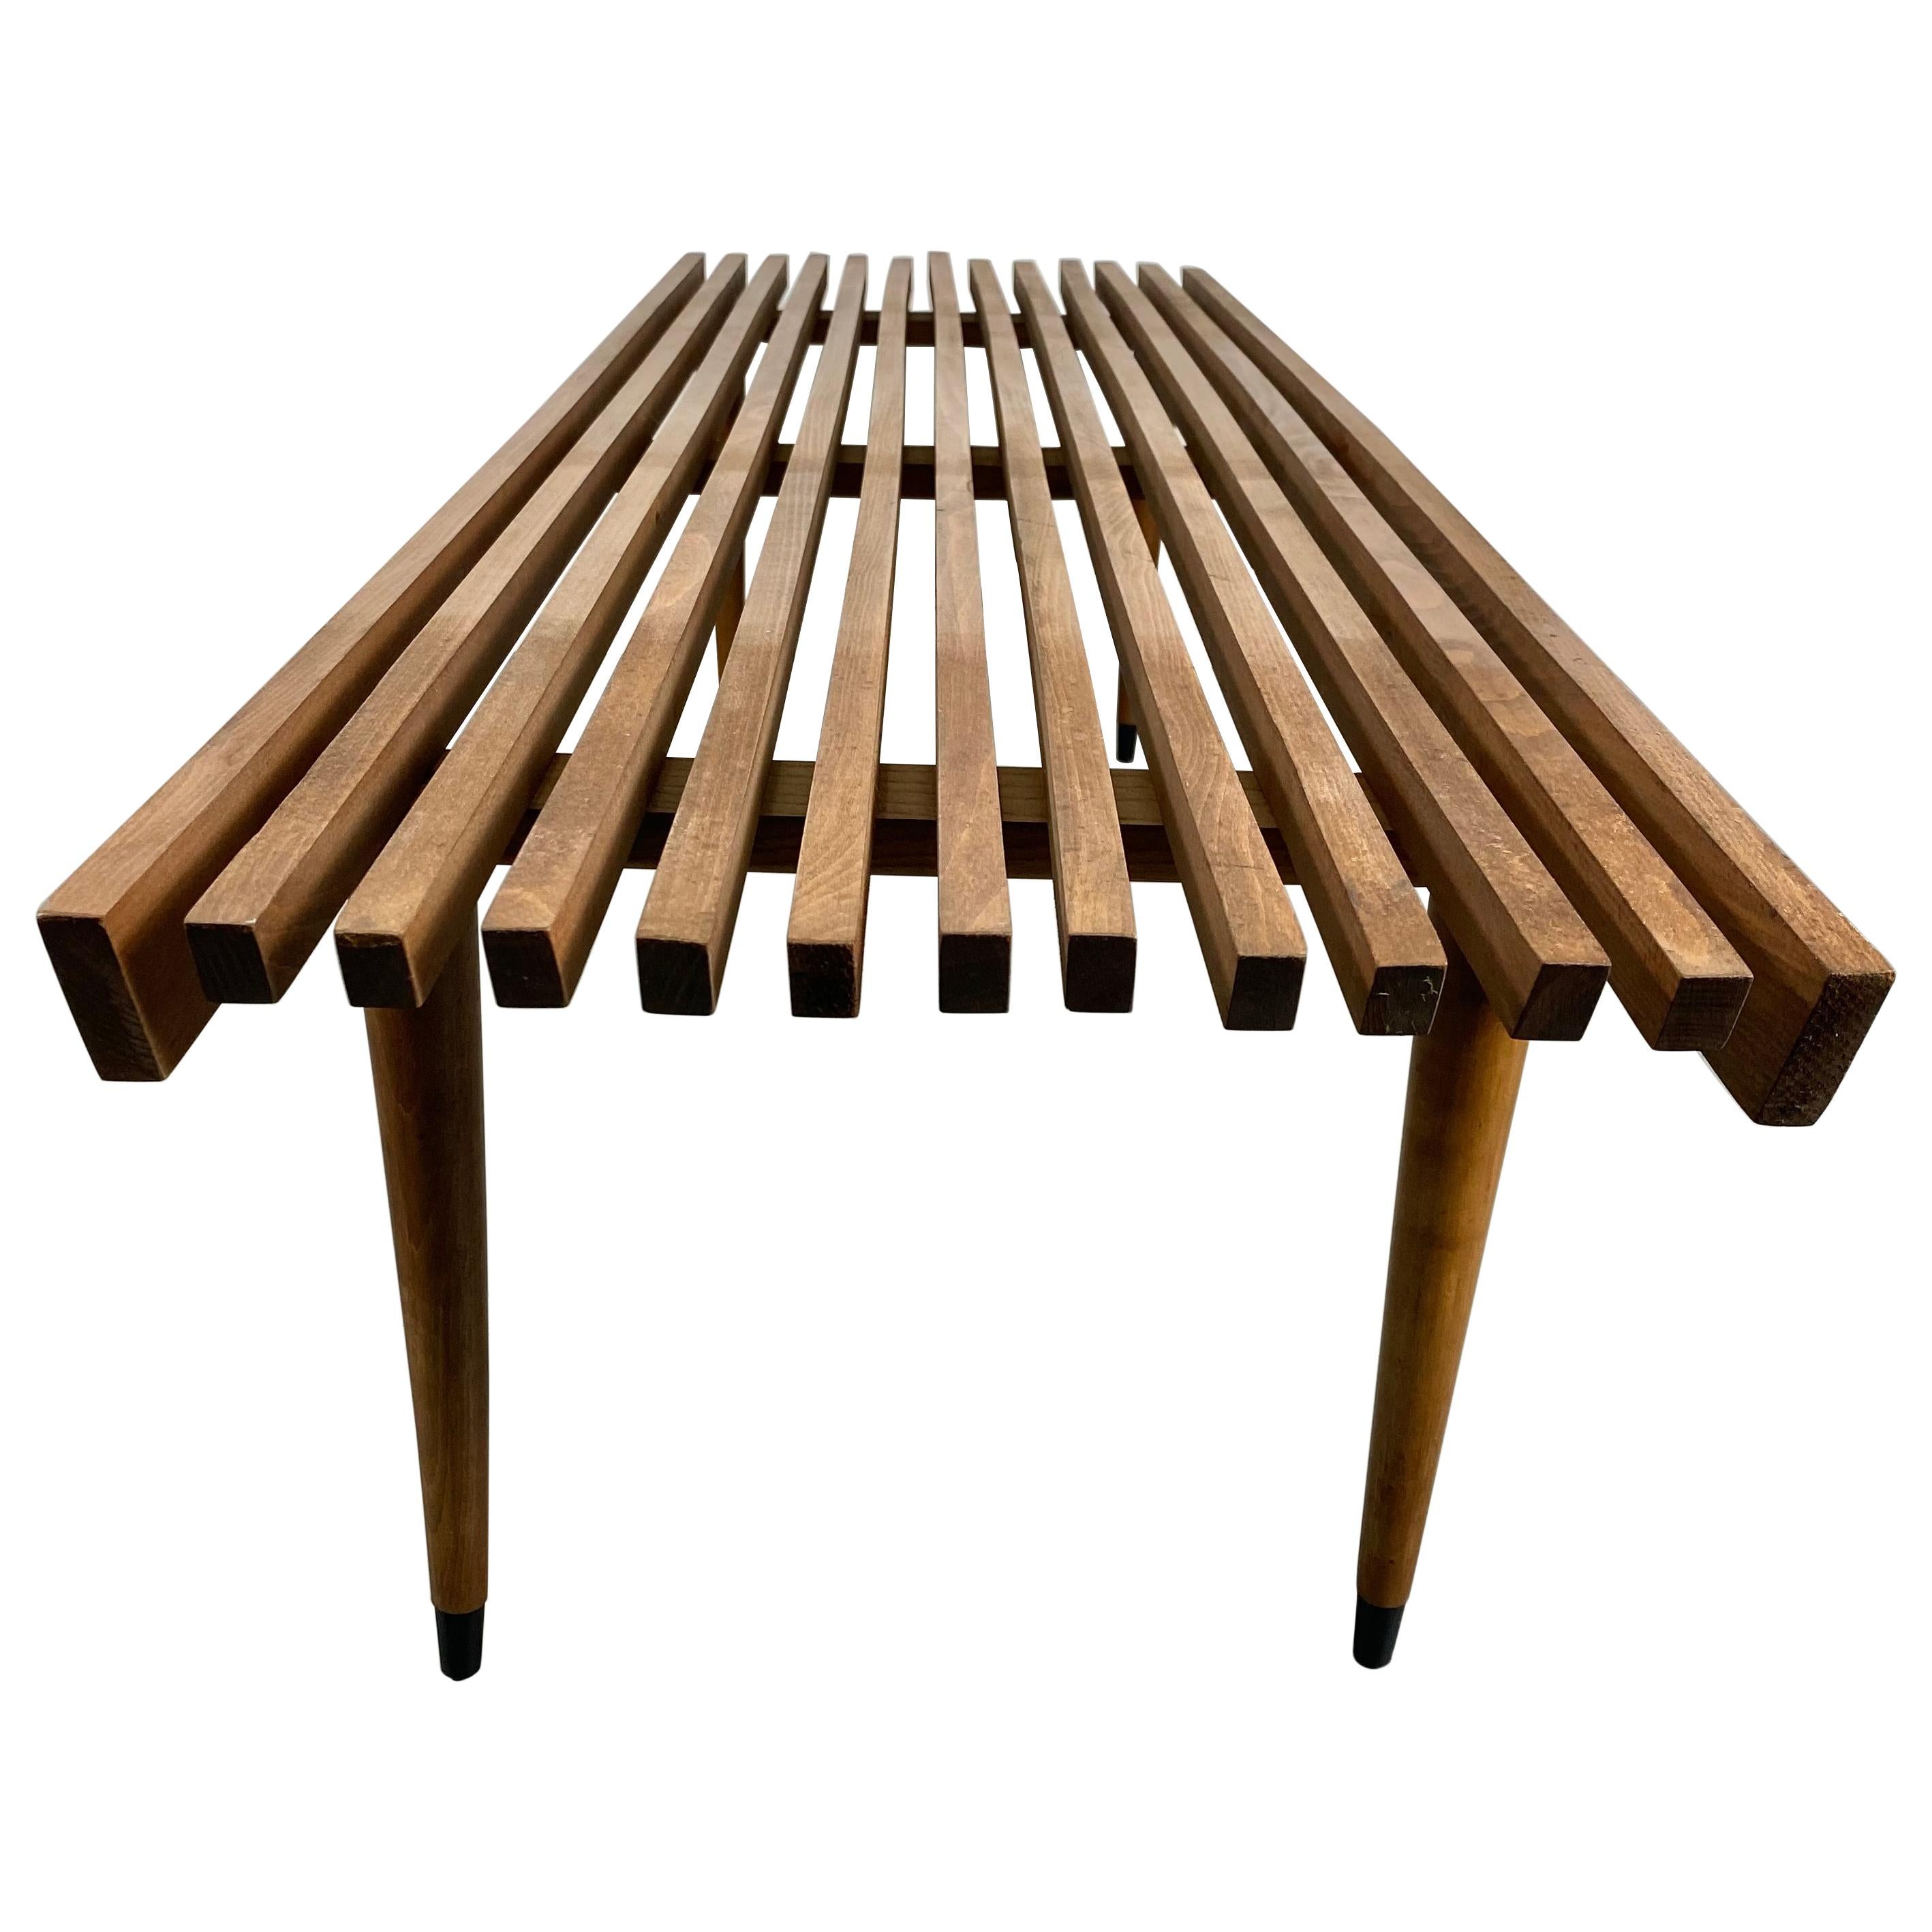 Classic Mid-Century Modern Slat Bench/ Table with Tapered Legs, 1960's